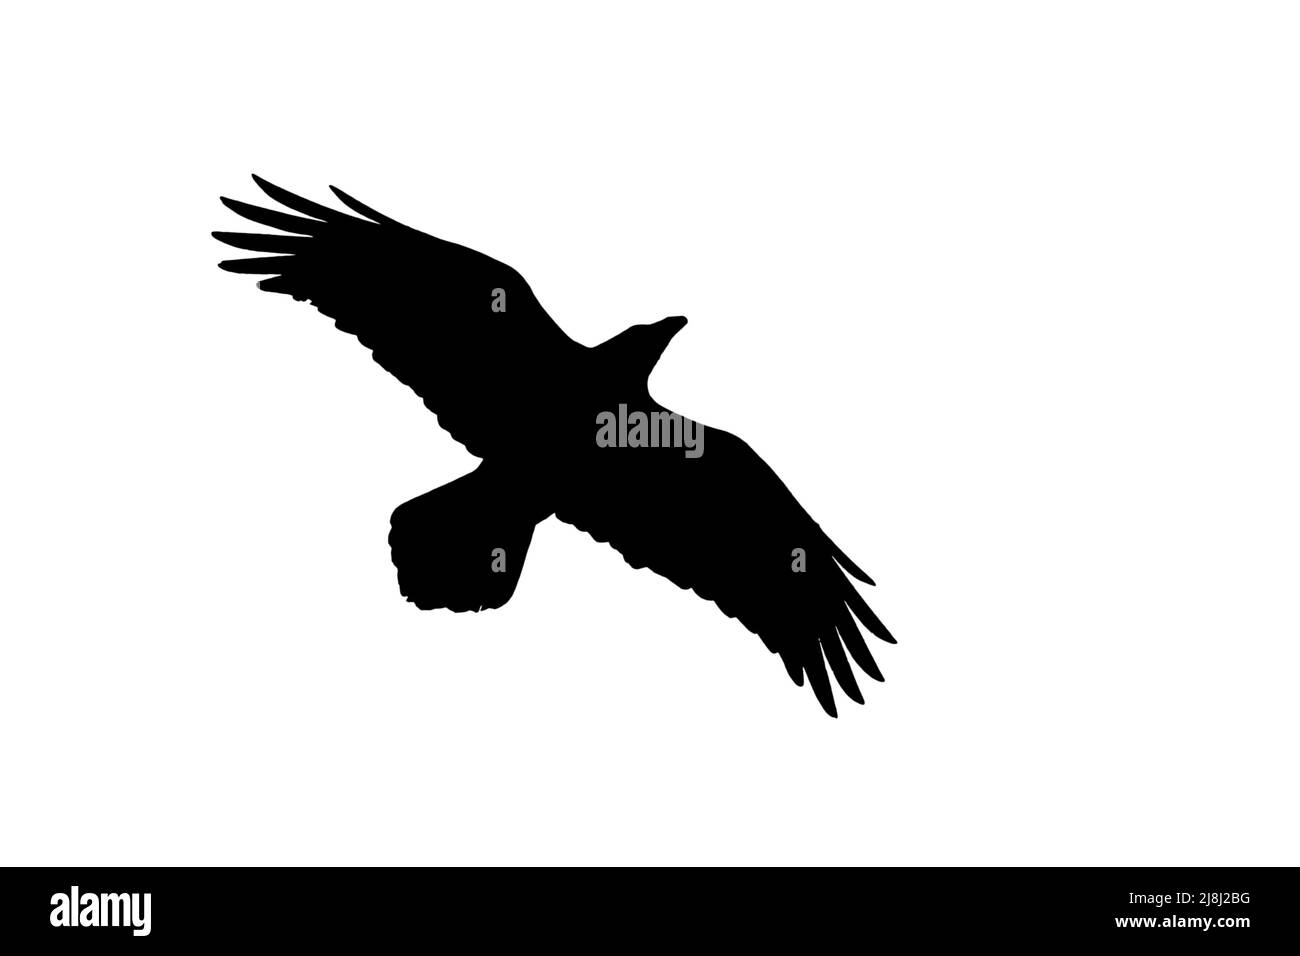 Silhouette of common raven / northern raven (Corvus corax) in flight outlined against white background to show wings, head and tail shapes Stock Photo